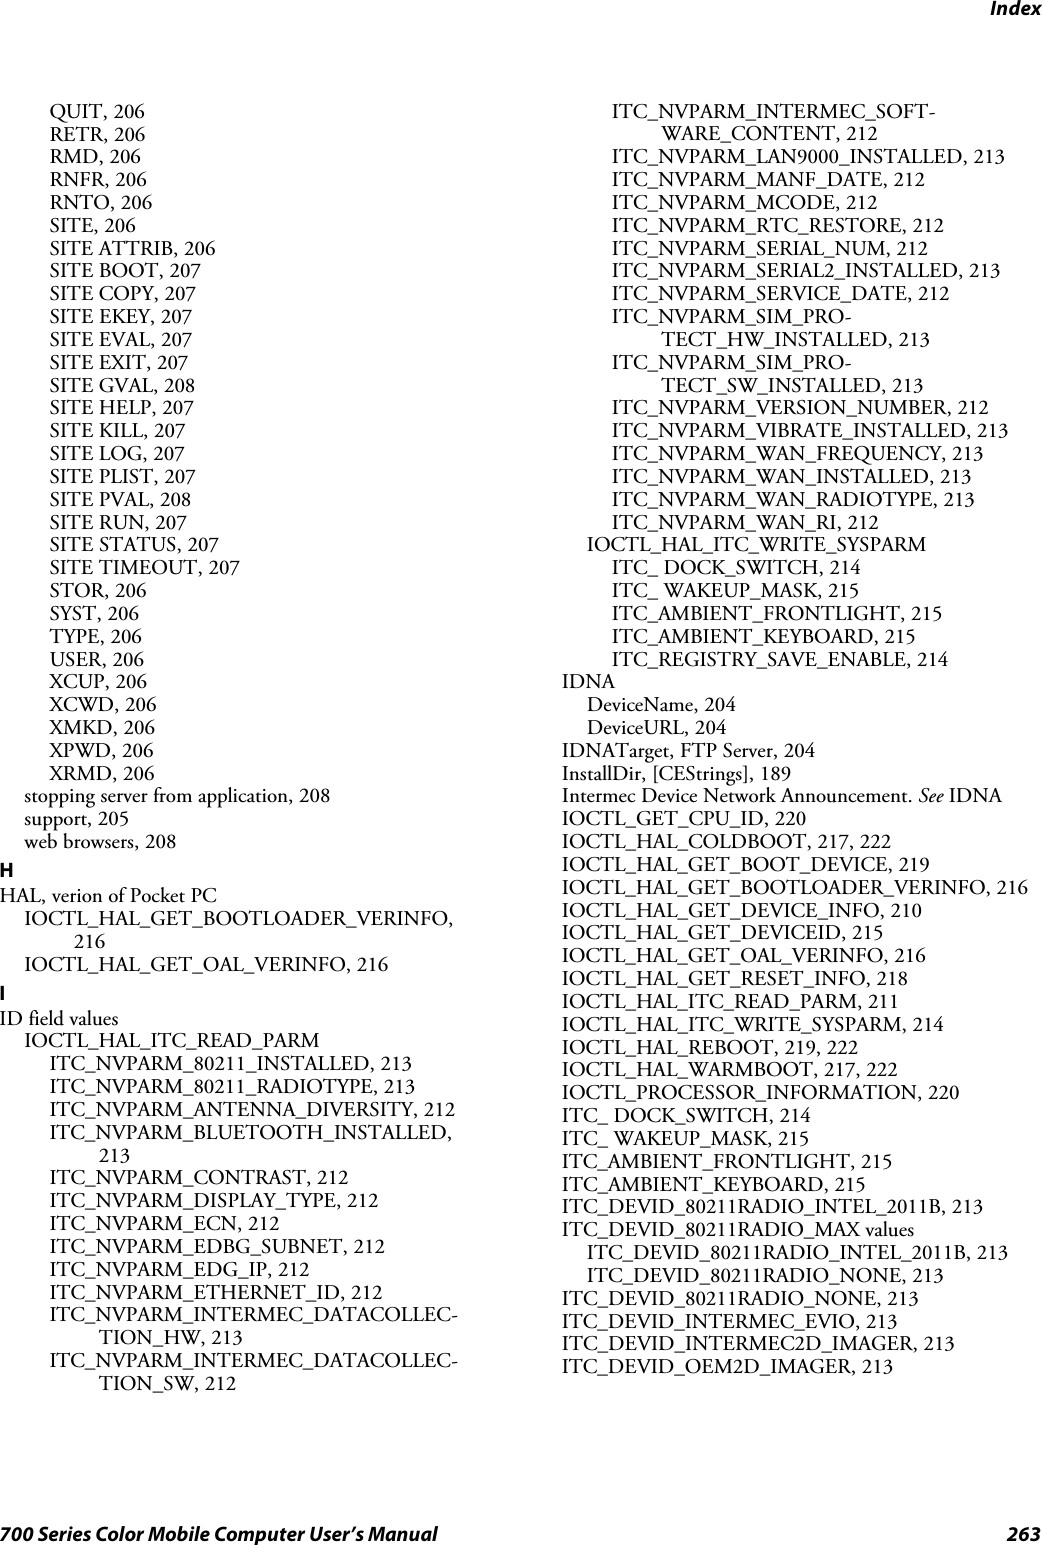 Index263700 Series Color Mobile Computer User’s ManualQUIT, 206RETR, 206RMD, 206RNFR, 206RNTO, 206SITE, 206SITE ATTRIB, 206SITE BOOT, 207SITE COPY, 207SITE EKEY, 207SITE EVAL, 207SITE EXIT, 207SITE GVAL, 208SITE HELP, 207SITE KILL, 207SITE LOG, 207SITE PLIST, 207SITE PVAL, 208SITE RUN, 207SITE STATUS, 207SITE TIMEOUT, 207STOR, 206SYST, 206TYPE, 206USER, 206XCUP, 206XCWD, 206XMKD, 206XPWD, 206XRMD, 206stopping server from application, 208support, 205web browsers, 208HHAL, verion of Pocket PCIOCTL_HAL_GET_BOOTLOADER_VERINFO,216IOCTL_HAL_GET_OAL_VERINFO, 216IID field valuesIOCTL_HAL_ITC_READ_PARMITC_NVPARM_80211_INSTALLED, 213ITC_NVPARM_80211_RADIOTYPE, 213ITC_NVPARM_ANTENNA_DIVERSITY, 212ITC_NVPARM_BLUETOOTH_INSTALLED,213ITC_NVPARM_CONTRAST, 212ITC_NVPARM_DISPLAY_TYPE, 212ITC_NVPARM_ECN, 212ITC_NVPARM_EDBG_SUBNET, 212ITC_NVPARM_EDG_IP, 212ITC_NVPARM_ETHERNET_ID, 212ITC_NVPARM_INTERMEC_DATACOLLEC-TION_HW, 213ITC_NVPARM_INTERMEC_DATACOLLEC-TION_SW, 212ITC_NVPARM_INTERMEC_SOFT-WARE_CONTENT, 212ITC_NVPARM_LAN9000_INSTALLED, 213ITC_NVPARM_MANF_DATE, 212ITC_NVPARM_MCODE, 212ITC_NVPARM_RTC_RESTORE, 212ITC_NVPARM_SERIAL_NUM, 212ITC_NVPARM_SERIAL2_INSTALLED, 213ITC_NVPARM_SERVICE_DATE, 212ITC_NVPARM_SIM_PRO-TECT_HW_INSTALLED, 213ITC_NVPARM_SIM_PRO-TECT_SW_INSTALLED, 213ITC_NVPARM_VERSION_NUMBER, 212ITC_NVPARM_VIBRATE_INSTALLED, 213ITC_NVPARM_WAN_FREQUENCY, 213ITC_NVPARM_WAN_INSTALLED, 213ITC_NVPARM_WAN_RADIOTYPE, 213ITC_NVPARM_WAN_RI, 212IOCTL_HAL_ITC_WRITE_SYSPARMITC_ DOCK_SWITCH, 214ITC_ WAKEUP_MASK, 215ITC_AMBIENT_FRONTLIGHT, 215ITC_AMBIENT_KEYBOARD, 215ITC_REGISTRY_SAVE_ENABLE, 214IDNADeviceName, 204DeviceURL, 204IDNATarget, FTP Server, 204InstallDir, [CEStrings], 189Intermec Device Network Announcement. See IDNAIOCTL_GET_CPU_ID, 220IOCTL_HAL_COLDBOOT, 217, 222IOCTL_HAL_GET_BOOT_DEVICE, 219IOCTL_HAL_GET_BOOTLOADER_VERINFO, 216IOCTL_HAL_GET_DEVICE_INFO, 210IOCTL_HAL_GET_DEVICEID, 215IOCTL_HAL_GET_OAL_VERINFO, 216IOCTL_HAL_GET_RESET_INFO, 218IOCTL_HAL_ITC_READ_PARM, 211IOCTL_HAL_ITC_WRITE_SYSPARM, 214IOCTL_HAL_REBOOT, 219, 222IOCTL_HAL_WARMBOOT, 217, 222IOCTL_PROCESSOR_INFORMATION, 220ITC_ DOCK_SWITCH, 214ITC_ WAKEUP_MASK, 215ITC_AMBIENT_FRONTLIGHT, 215ITC_AMBIENT_KEYBOARD, 215ITC_DEVID_80211RADIO_INTEL_2011B, 213ITC_DEVID_80211RADIO_MAX valuesITC_DEVID_80211RADIO_INTEL_2011B, 213ITC_DEVID_80211RADIO_NONE, 213ITC_DEVID_80211RADIO_NONE, 213ITC_DEVID_INTERMEC_EVIO, 213ITC_DEVID_INTERMEC2D_IMAGER, 213ITC_DEVID_OEM2D_IMAGER, 213